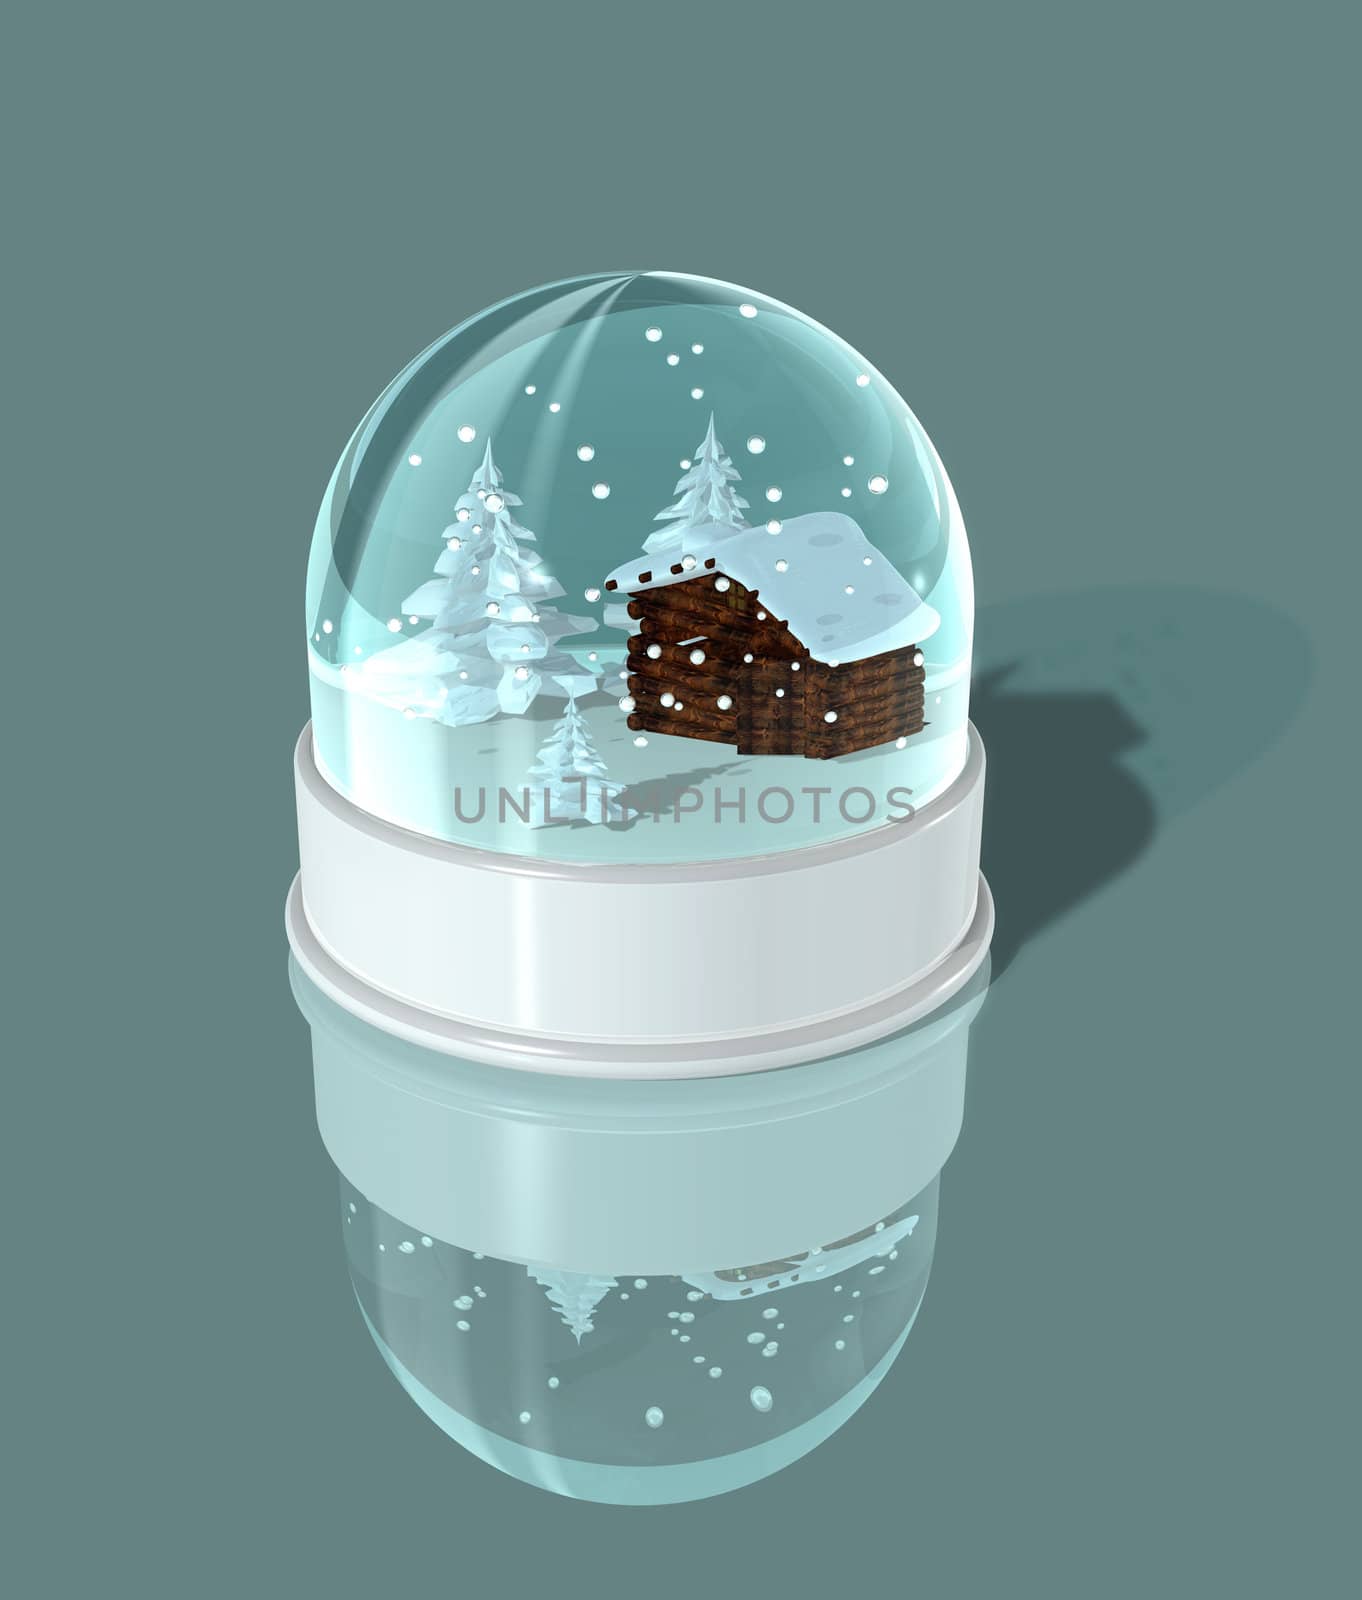 three dimensional illustration of a snow globe with a shack and firs